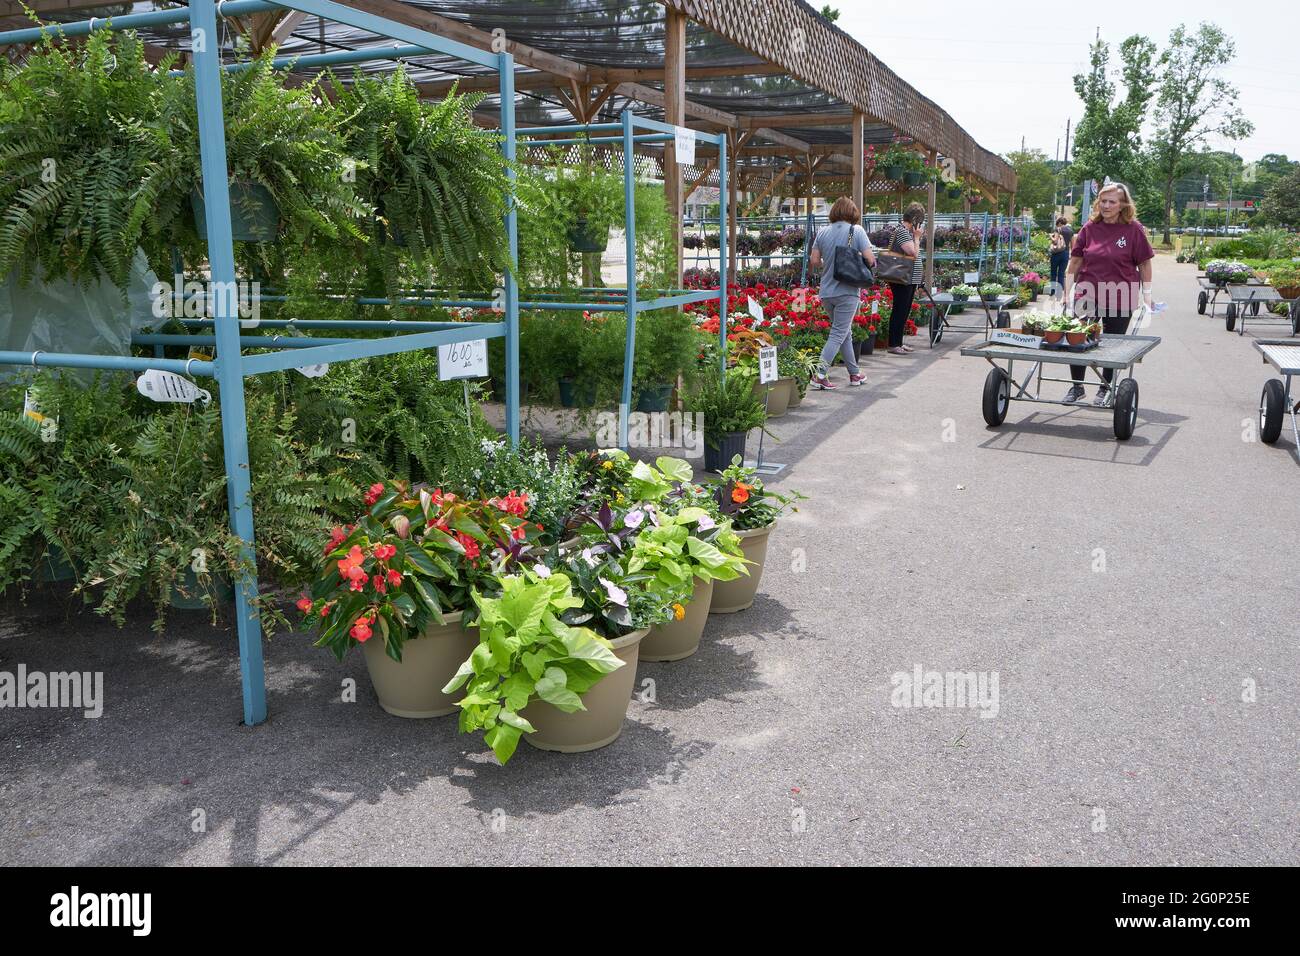 Outdoor garden center with people shopping and buying plants and flowers in Montgomery Alabama, USA. Stock Photo